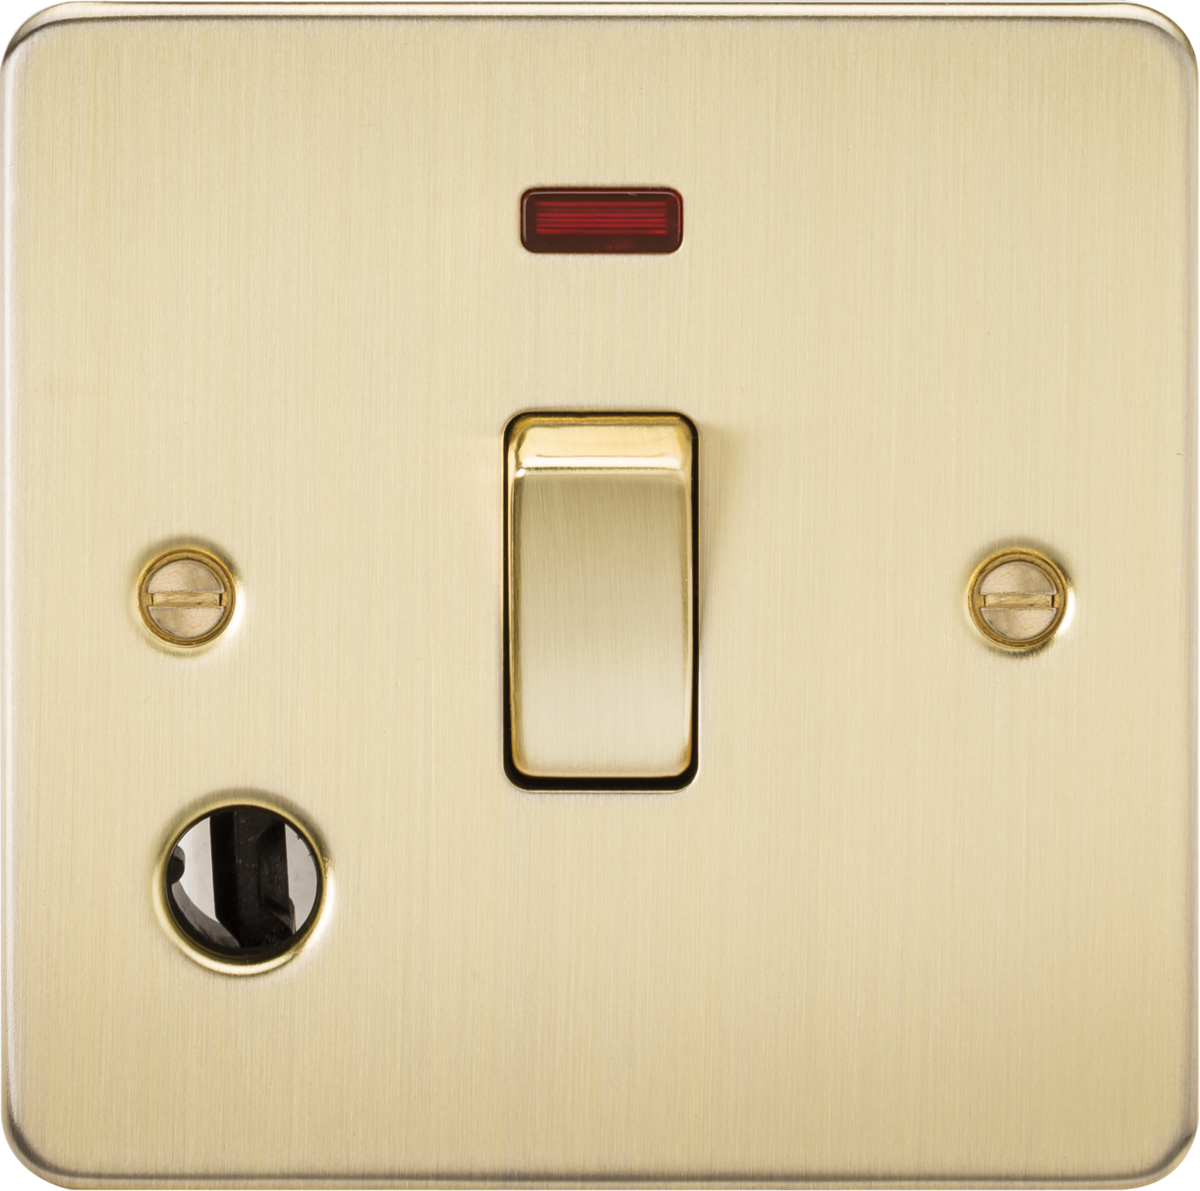 Flat Plate 20A 1G DP switch with neon and flex outlet - brushed brass